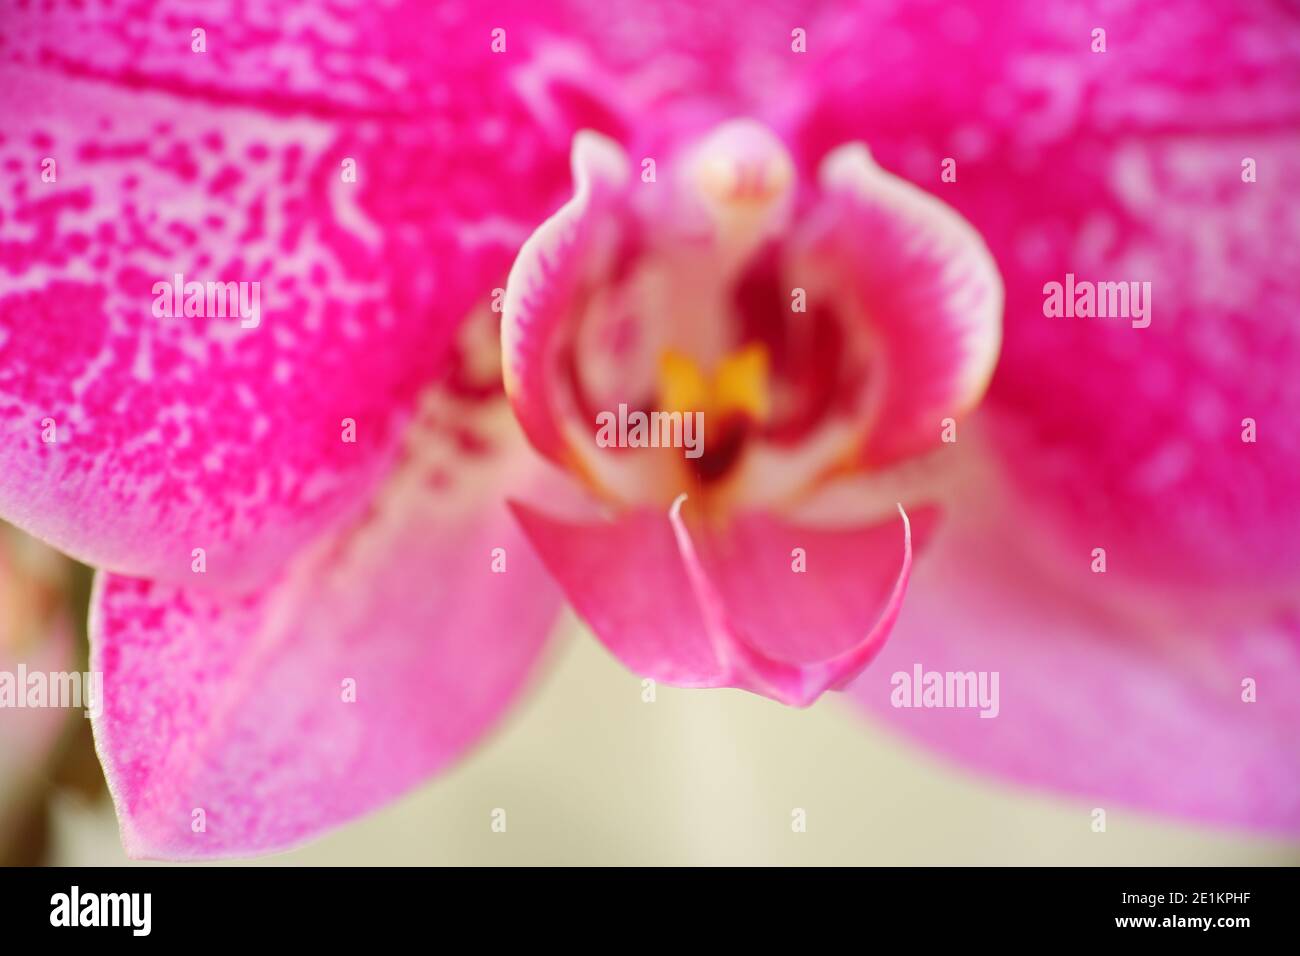 defocuse close up detail macro structure of purple dendrobium orchid flower, out of focus Stock Photo